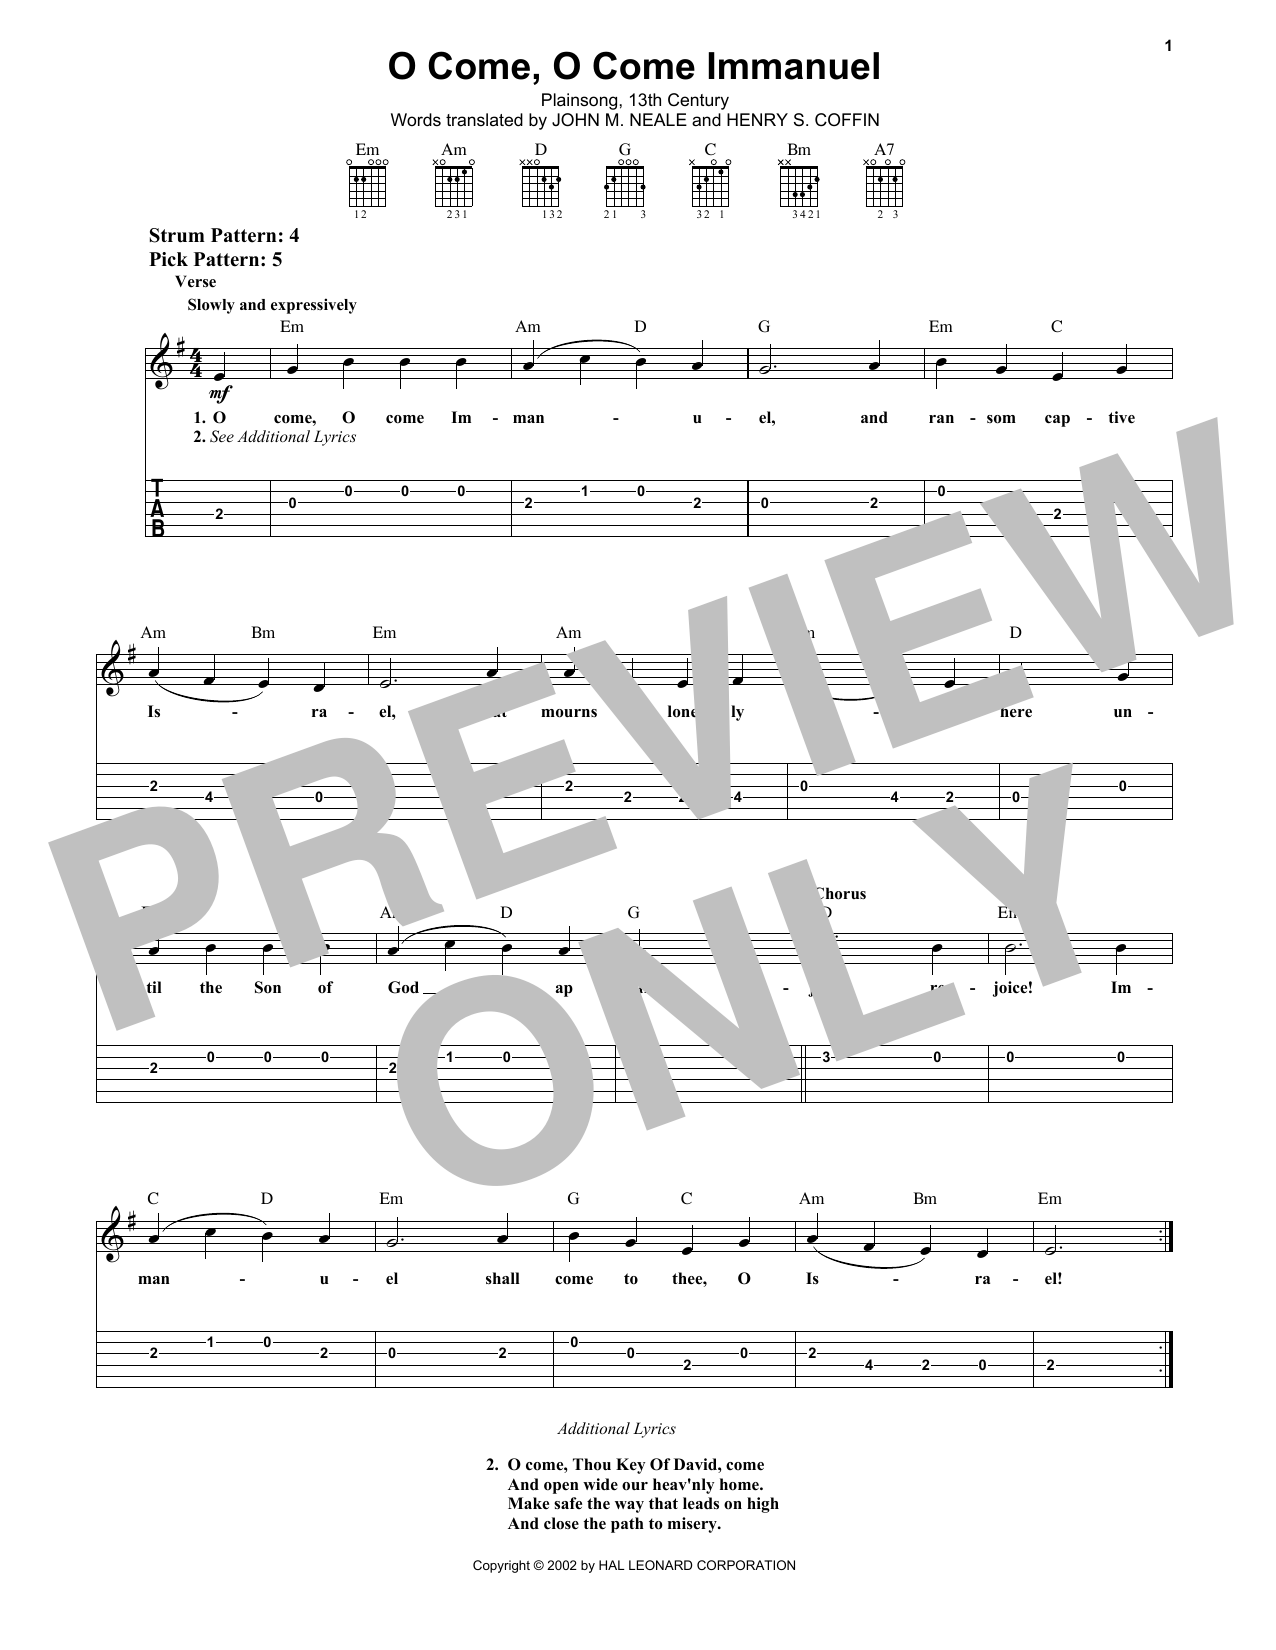 Download Plainsong, 13th Century O Come, O Come Immanuel Sheet Music